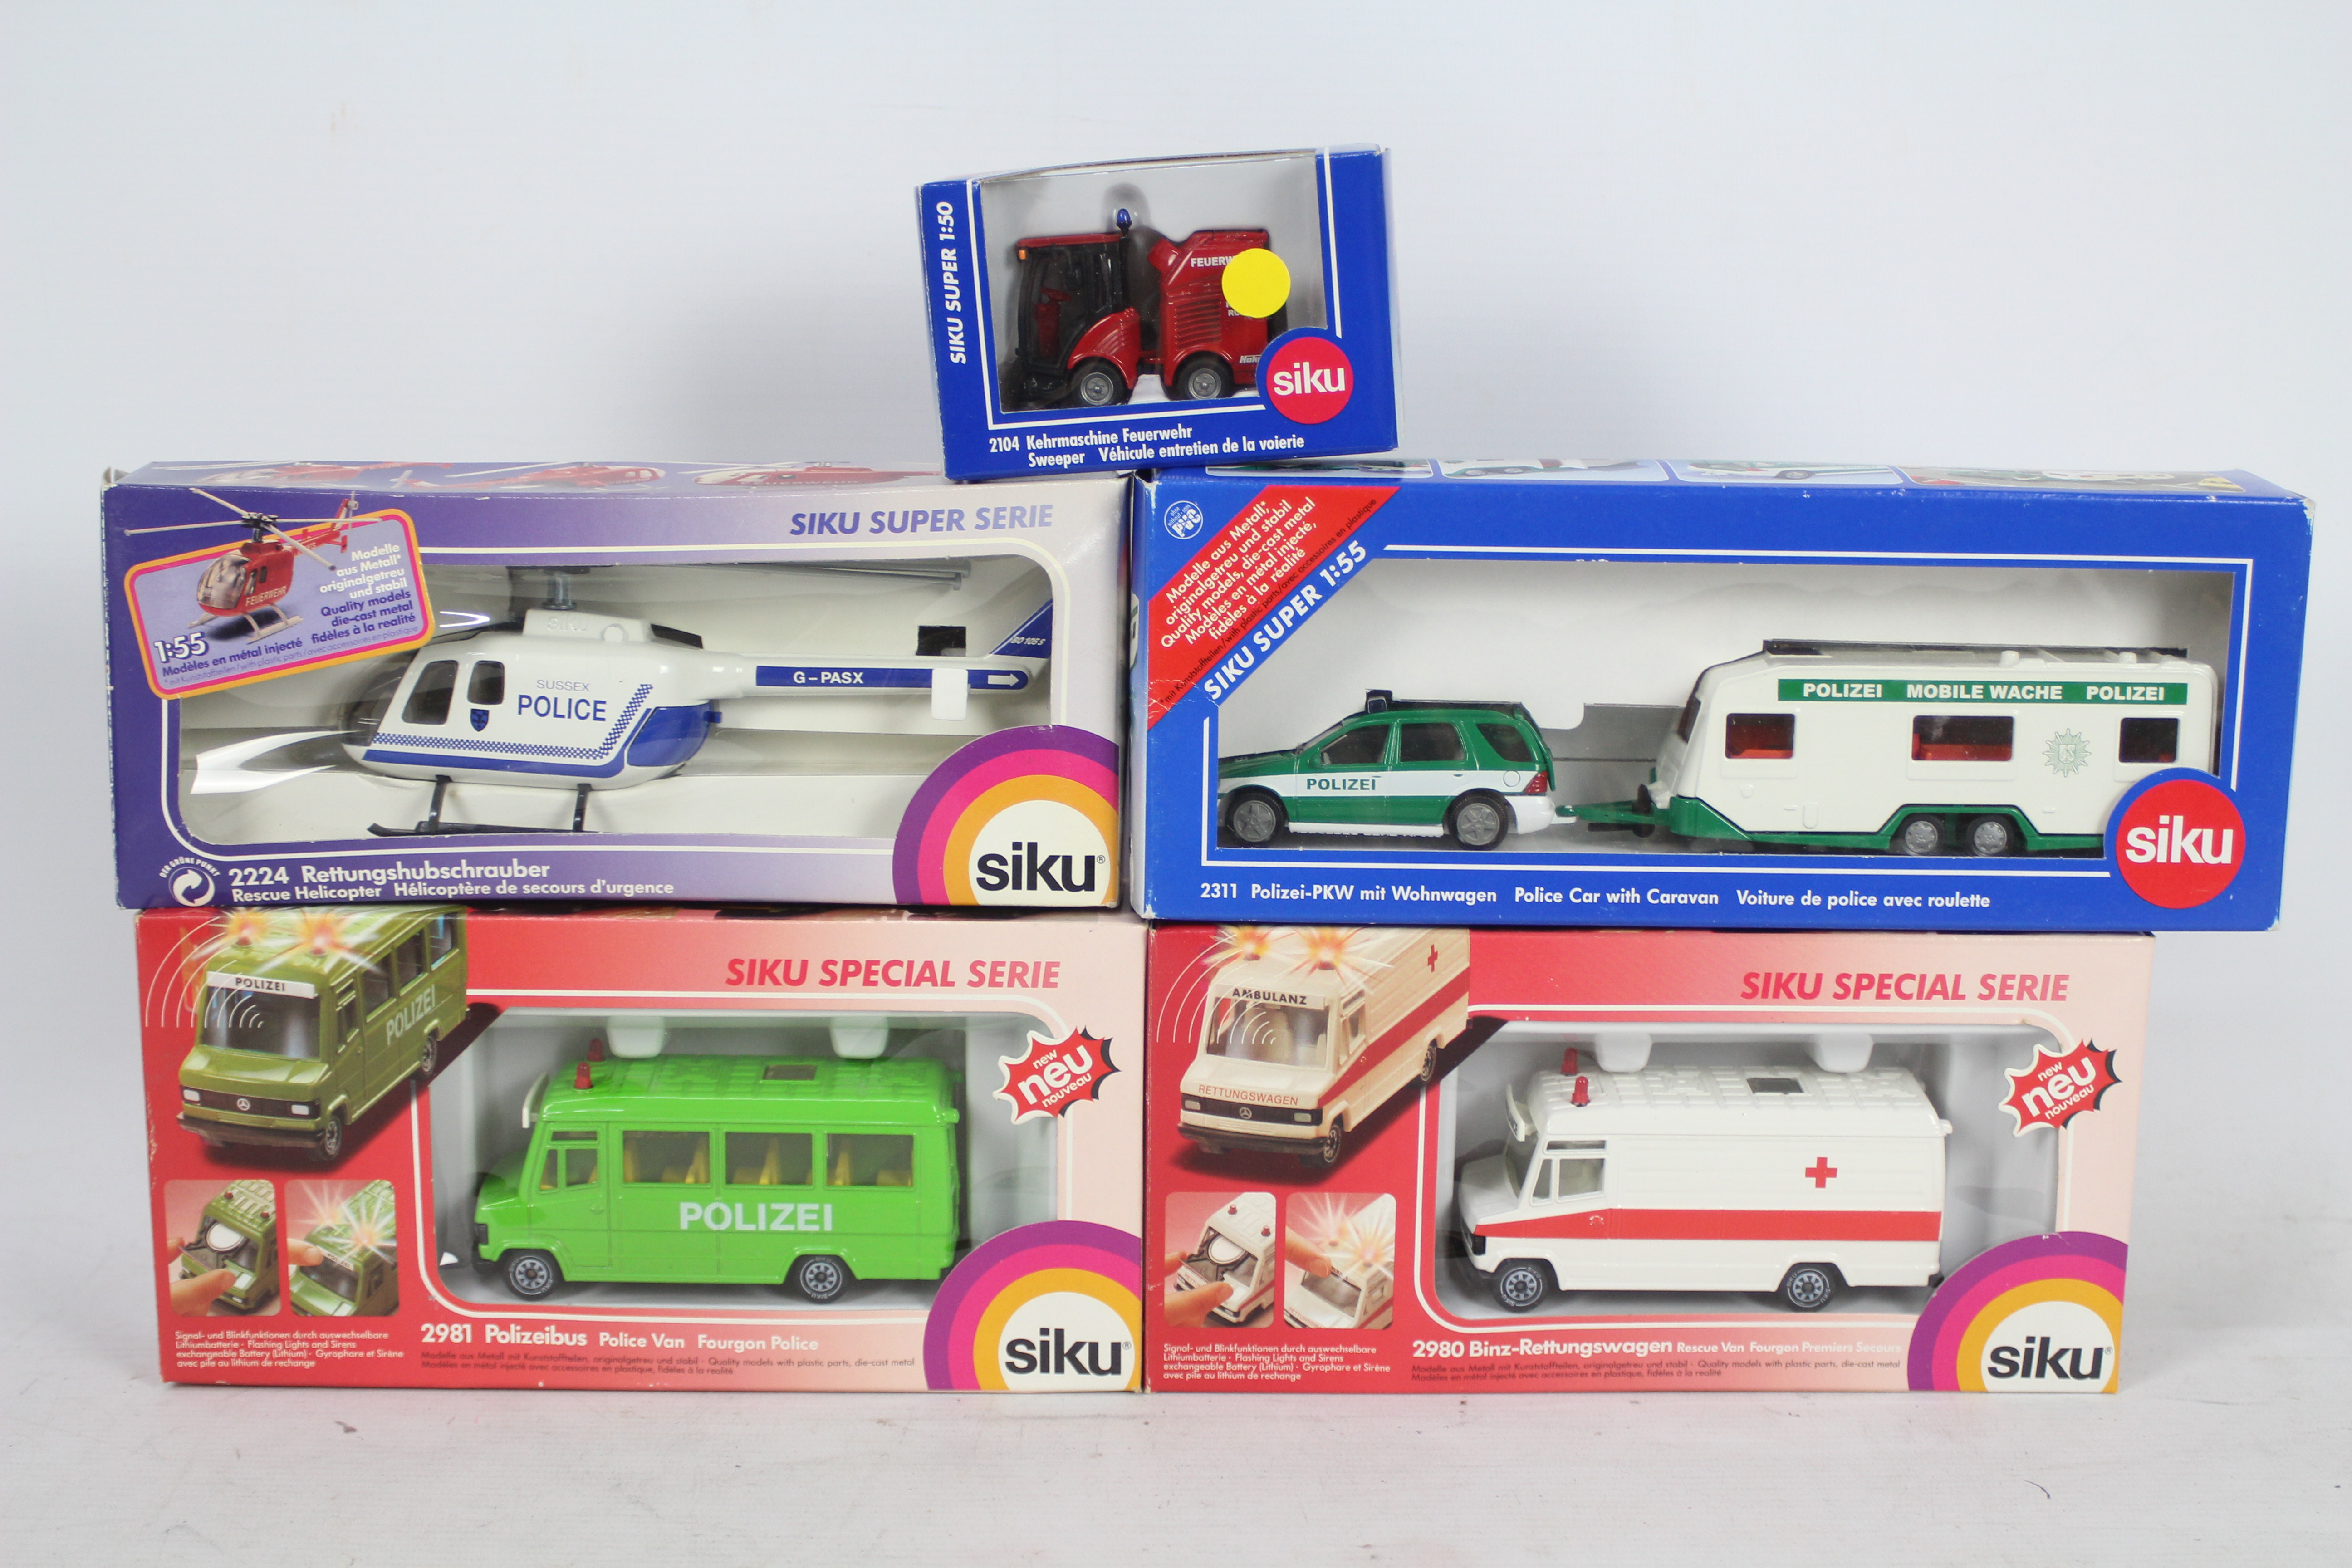 Siku - A group of five boxed 1:50 and 1:55 scale diecast European Fire / Emergency Vehicles from